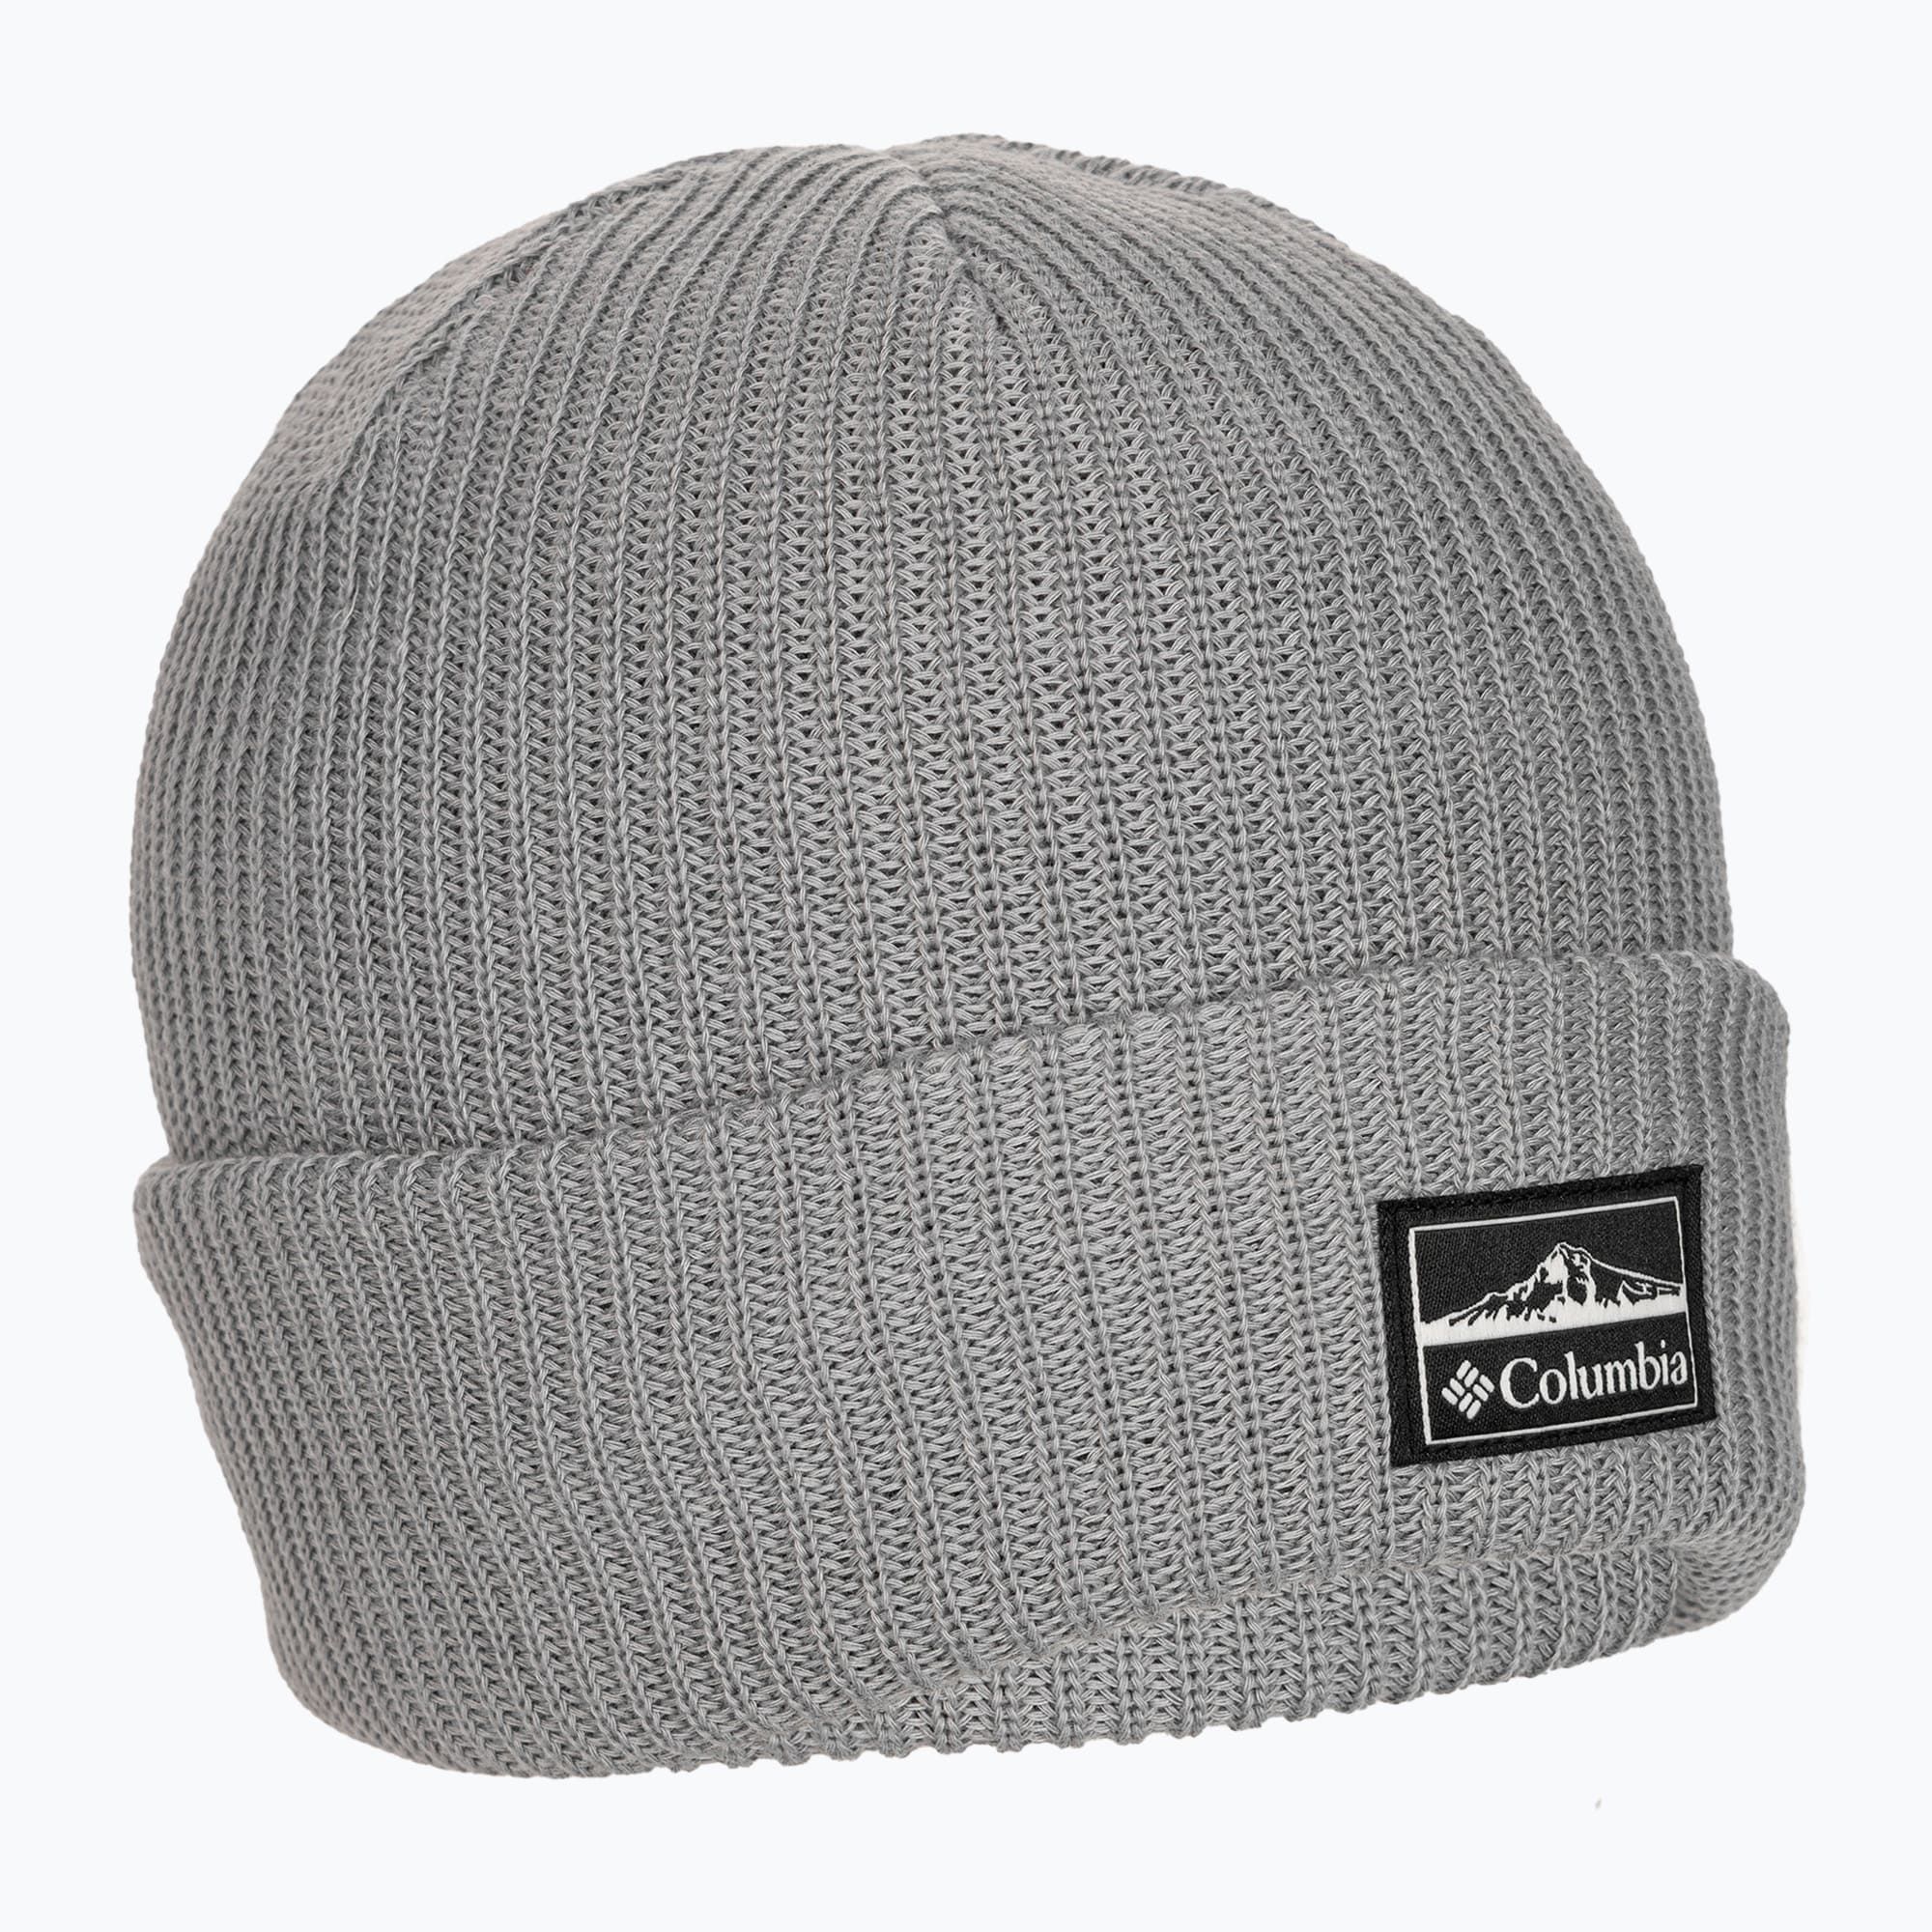 Columbia Lost Lager II winter beanie